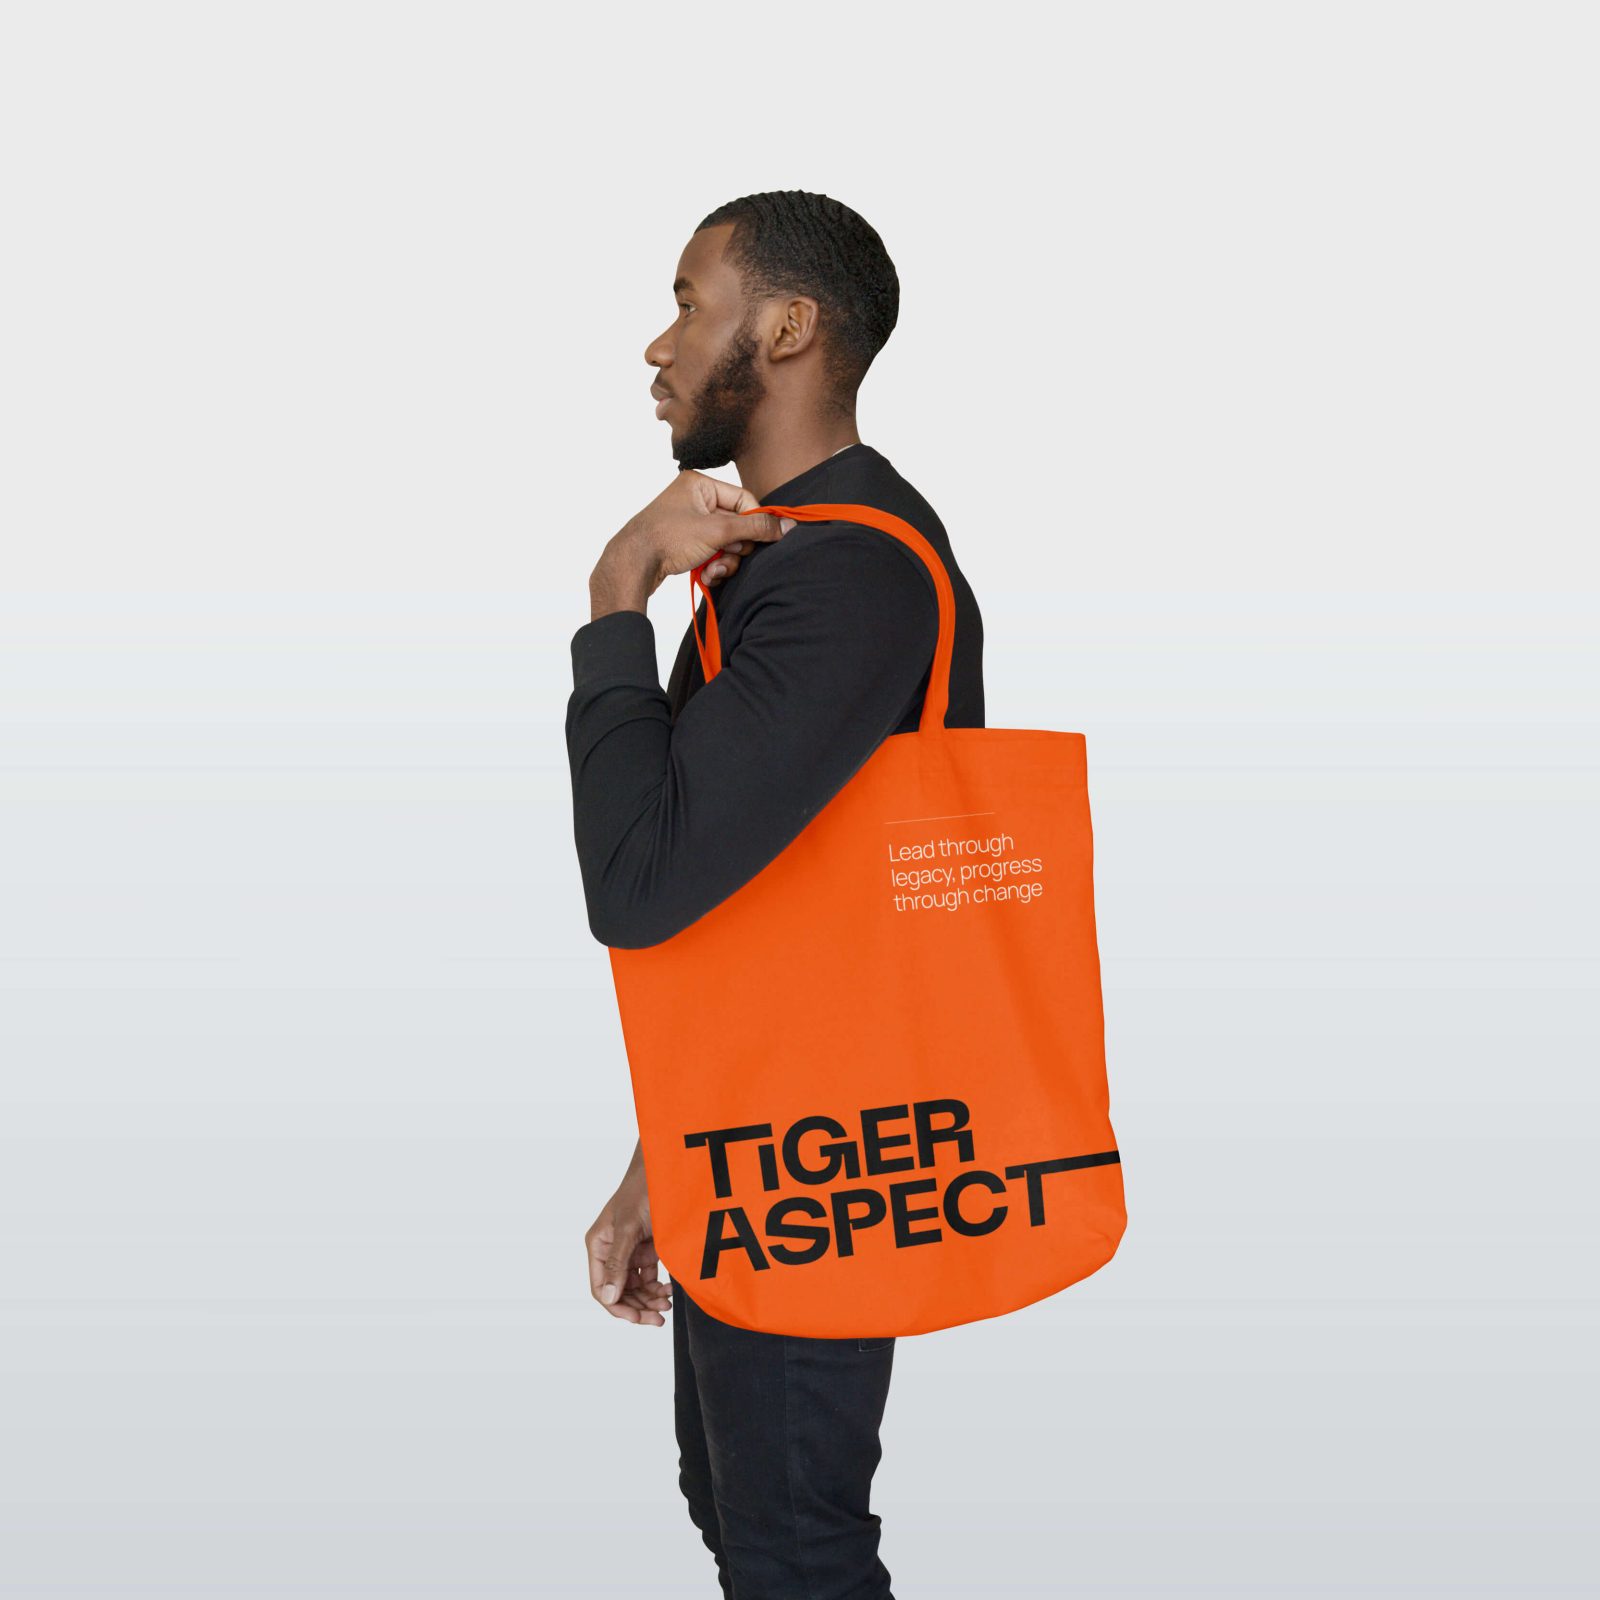 A man in profile, wearing a black top and carrying a bright orange tote bag with the text 